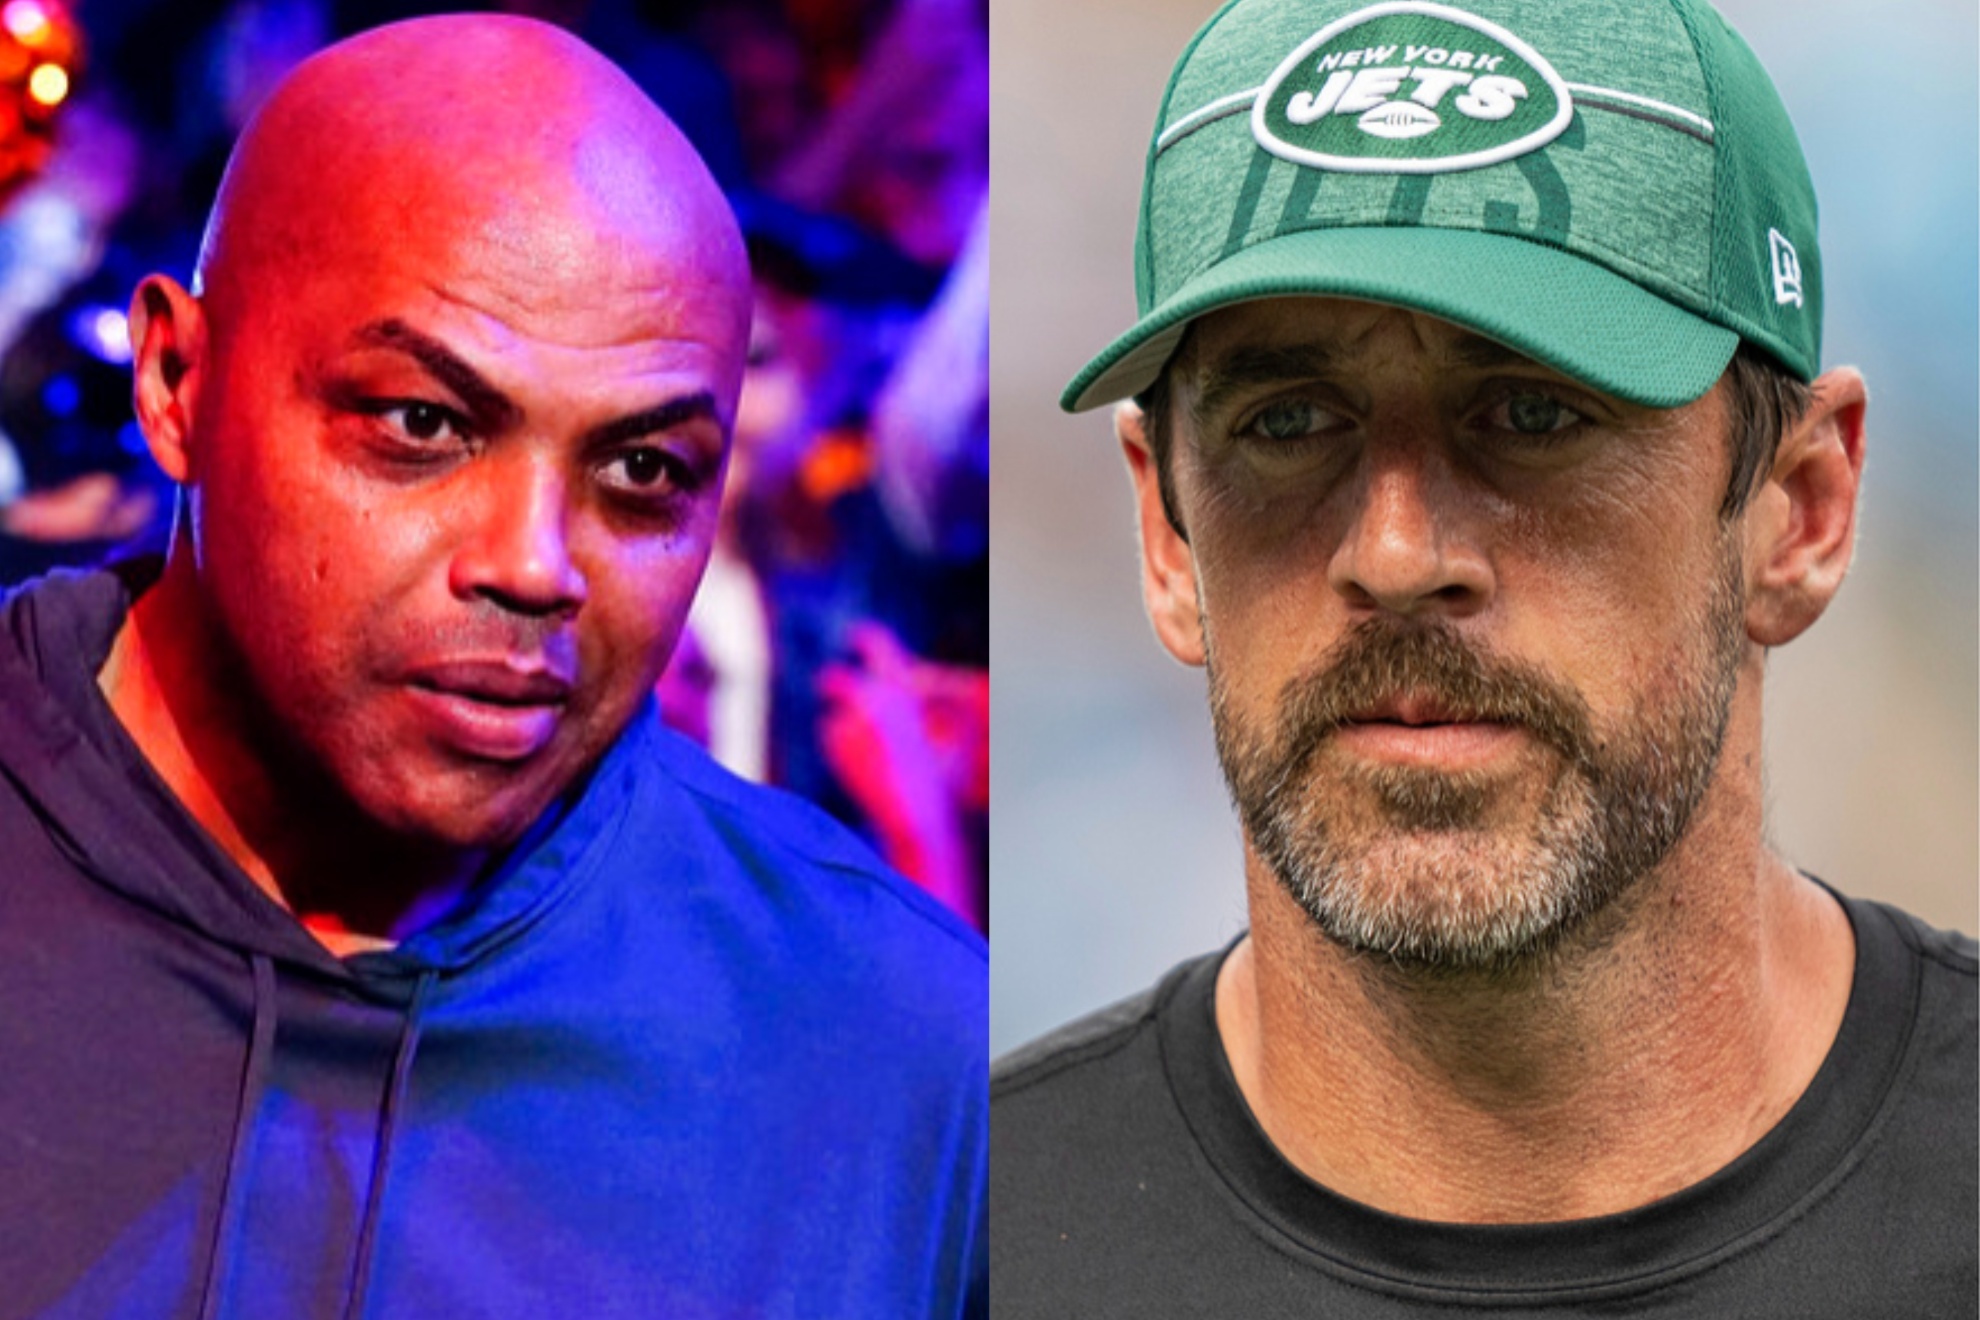 Charles Barkley shared his opinion on the Kimmel-Rodgers feud on national television